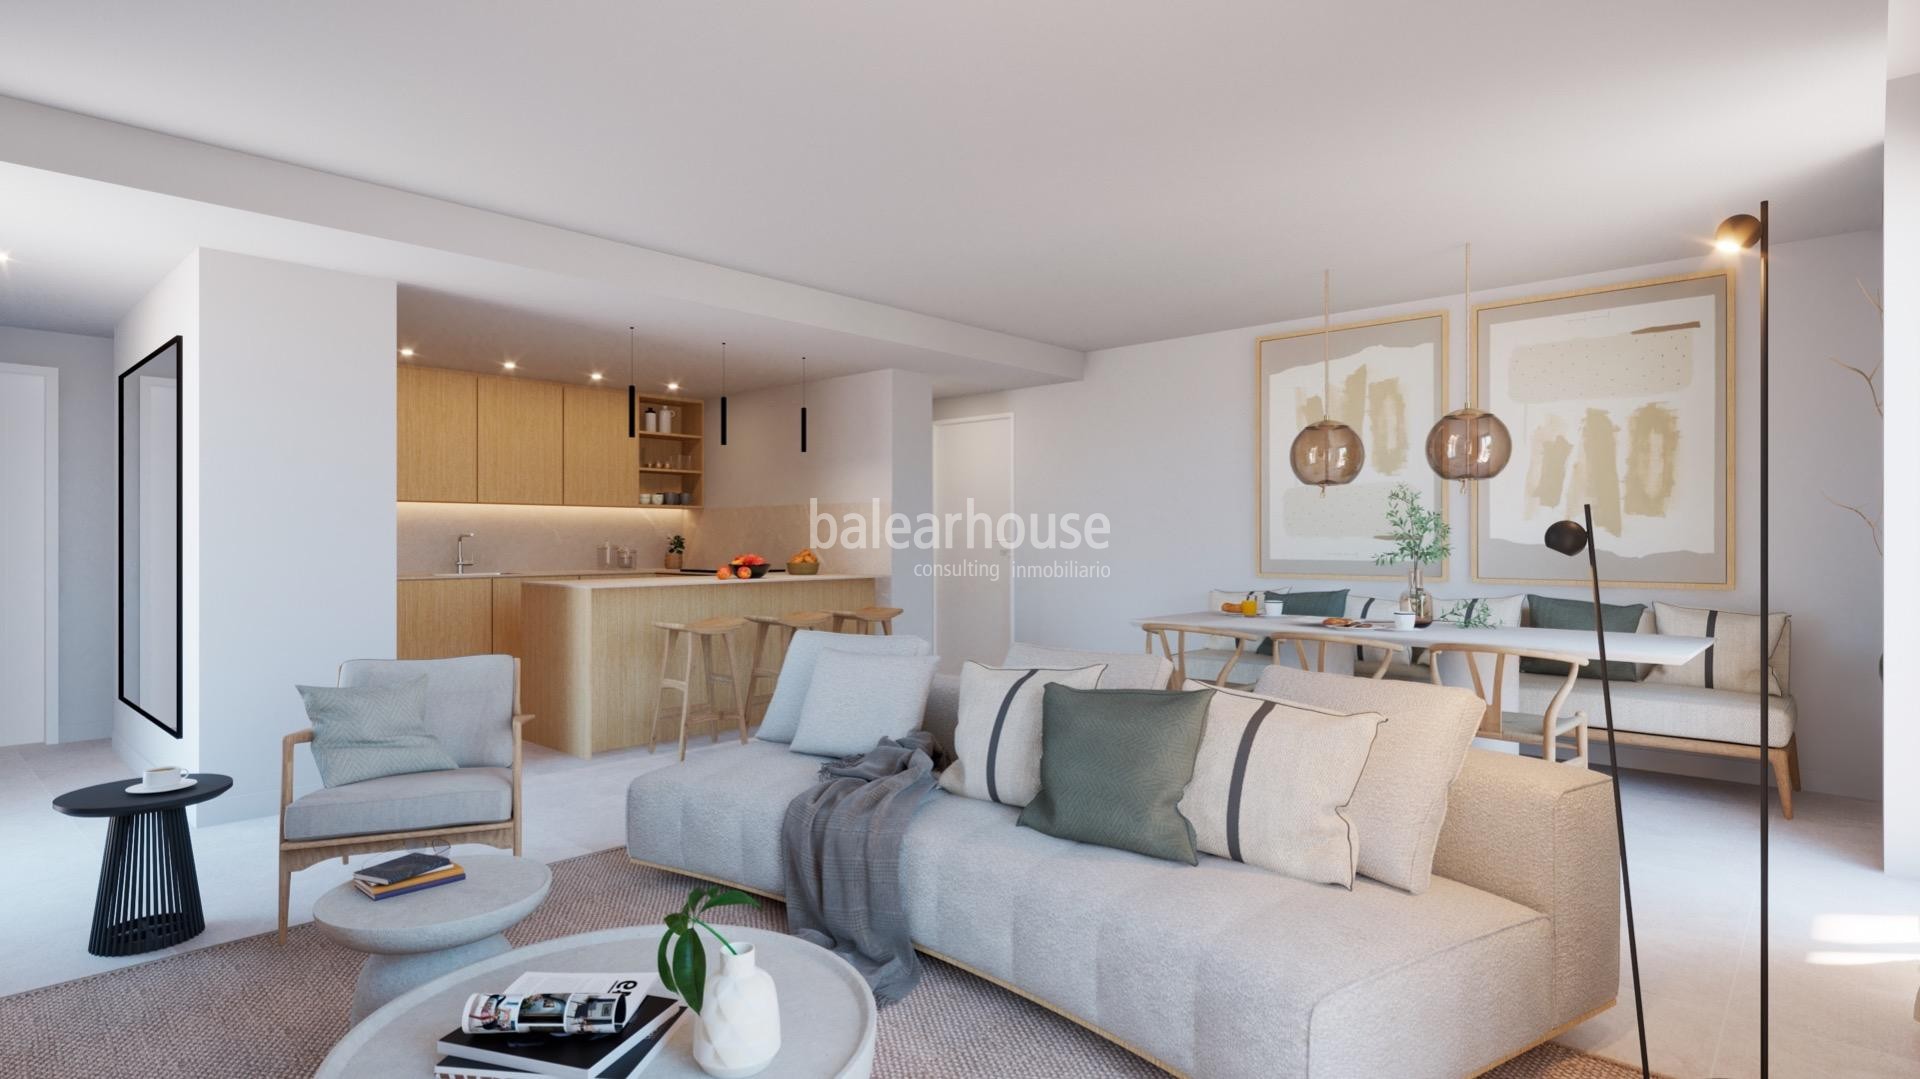 Excellent housing project with the best of current design in a protected building in Palma